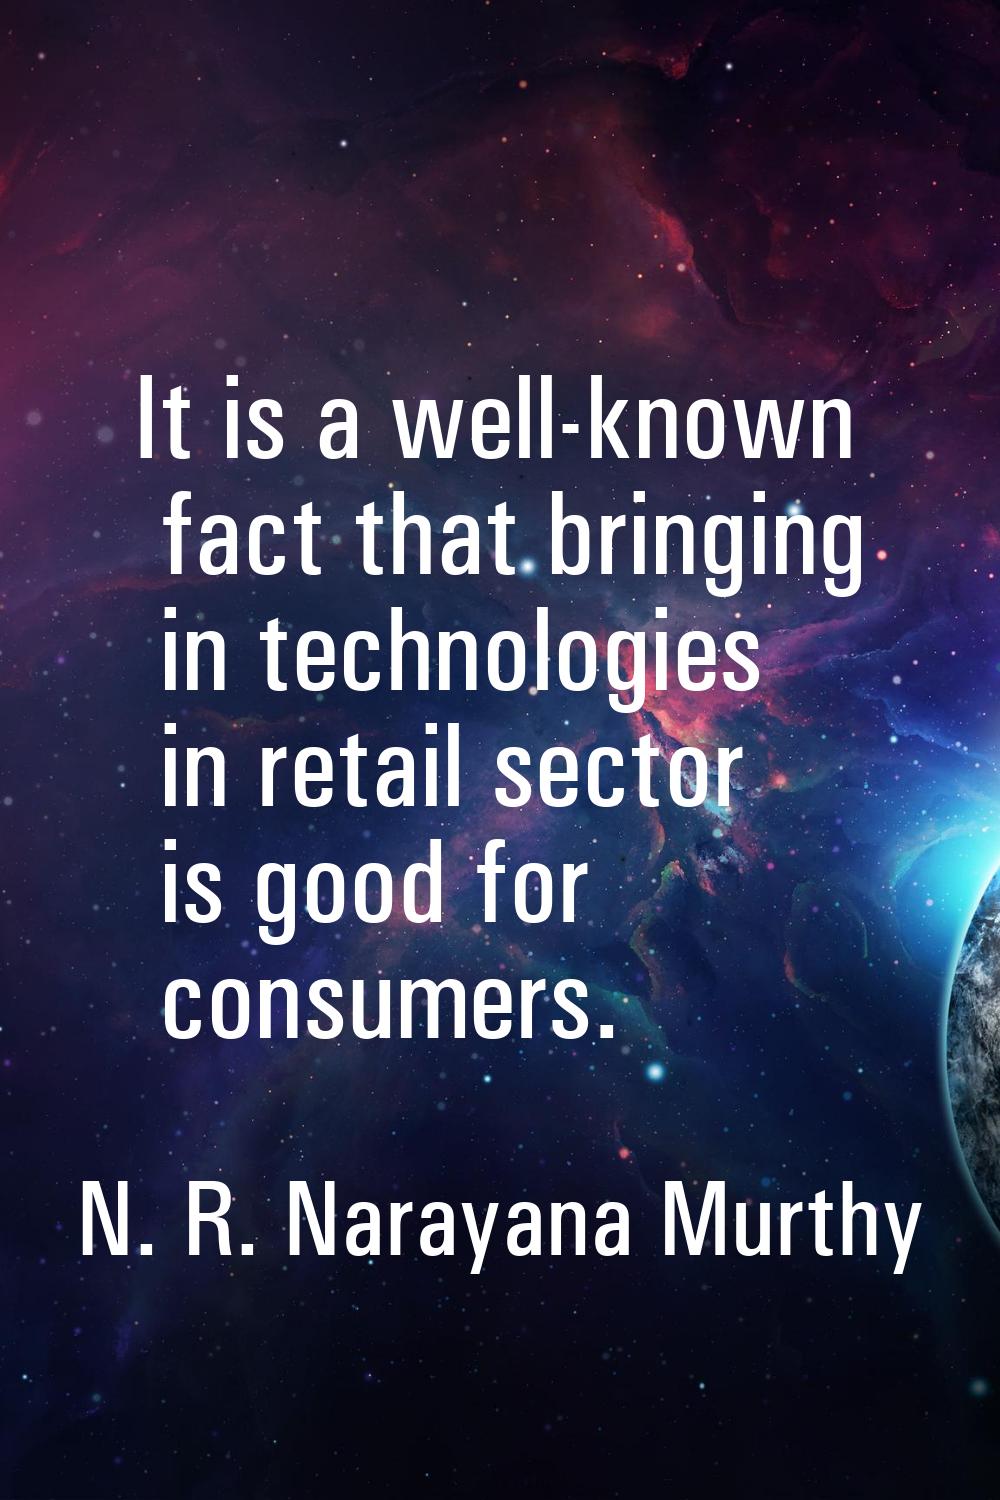 It is a well-known fact that bringing in technologies in retail sector is good for consumers.